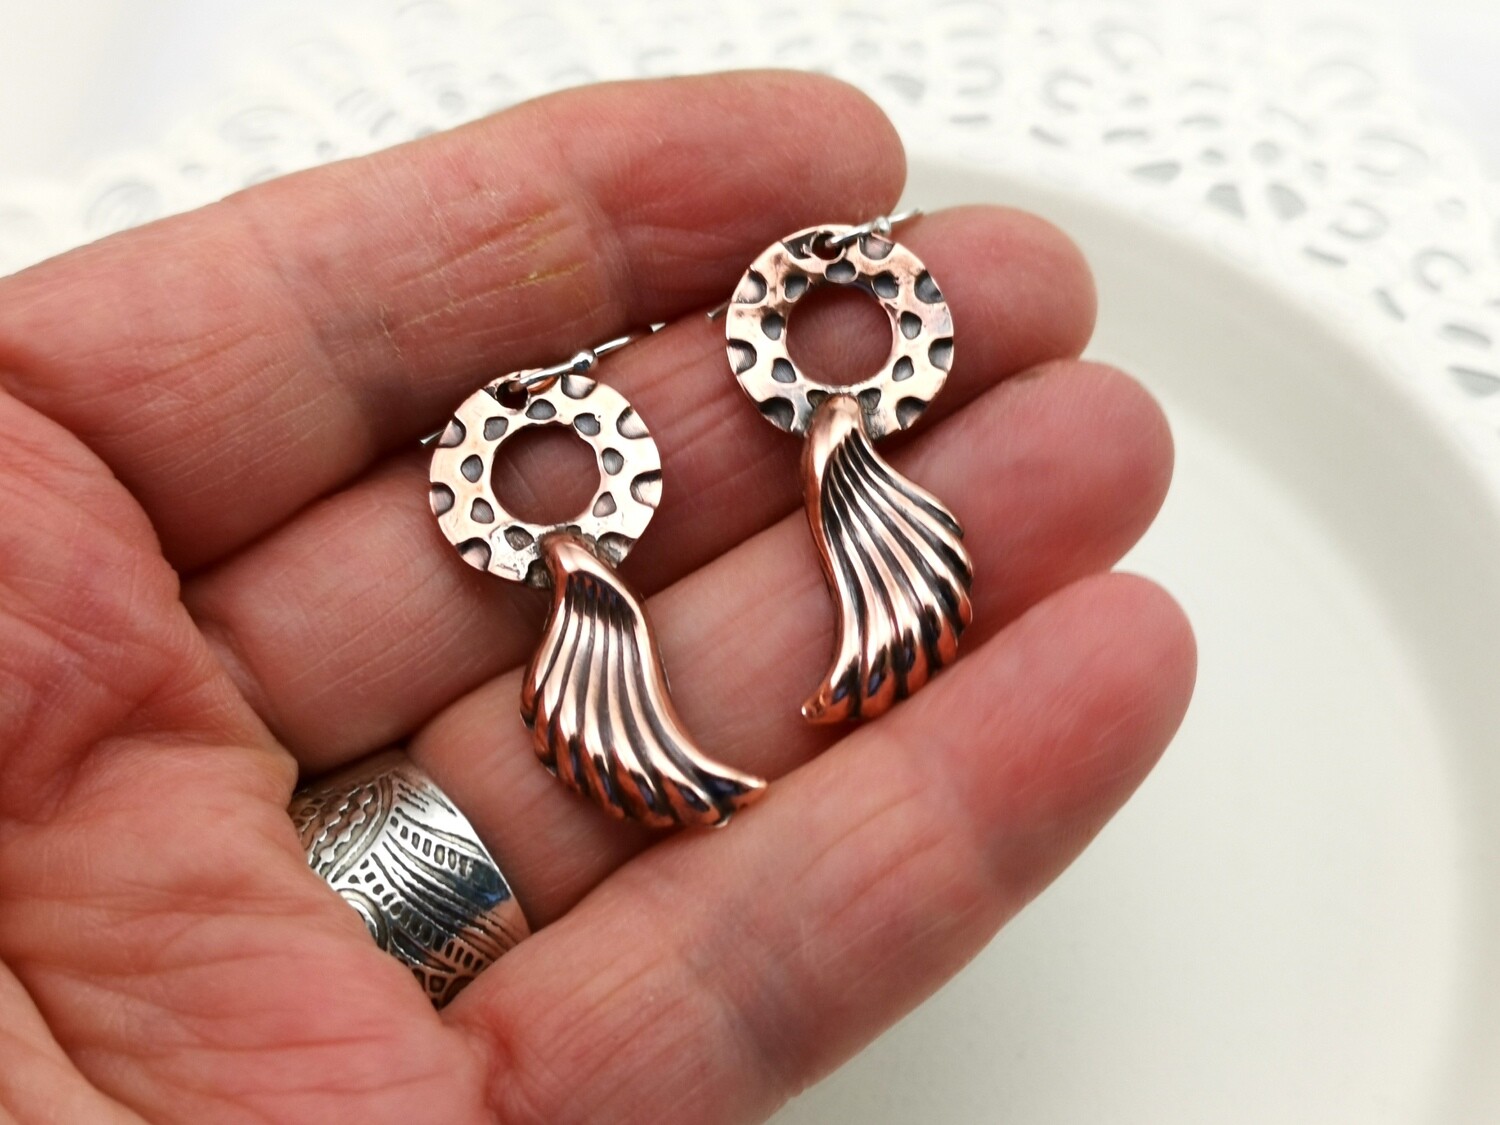 Give Souls Wings to Fly with Copper Wing Earrings, Gifts for Her, 7th Anniversary